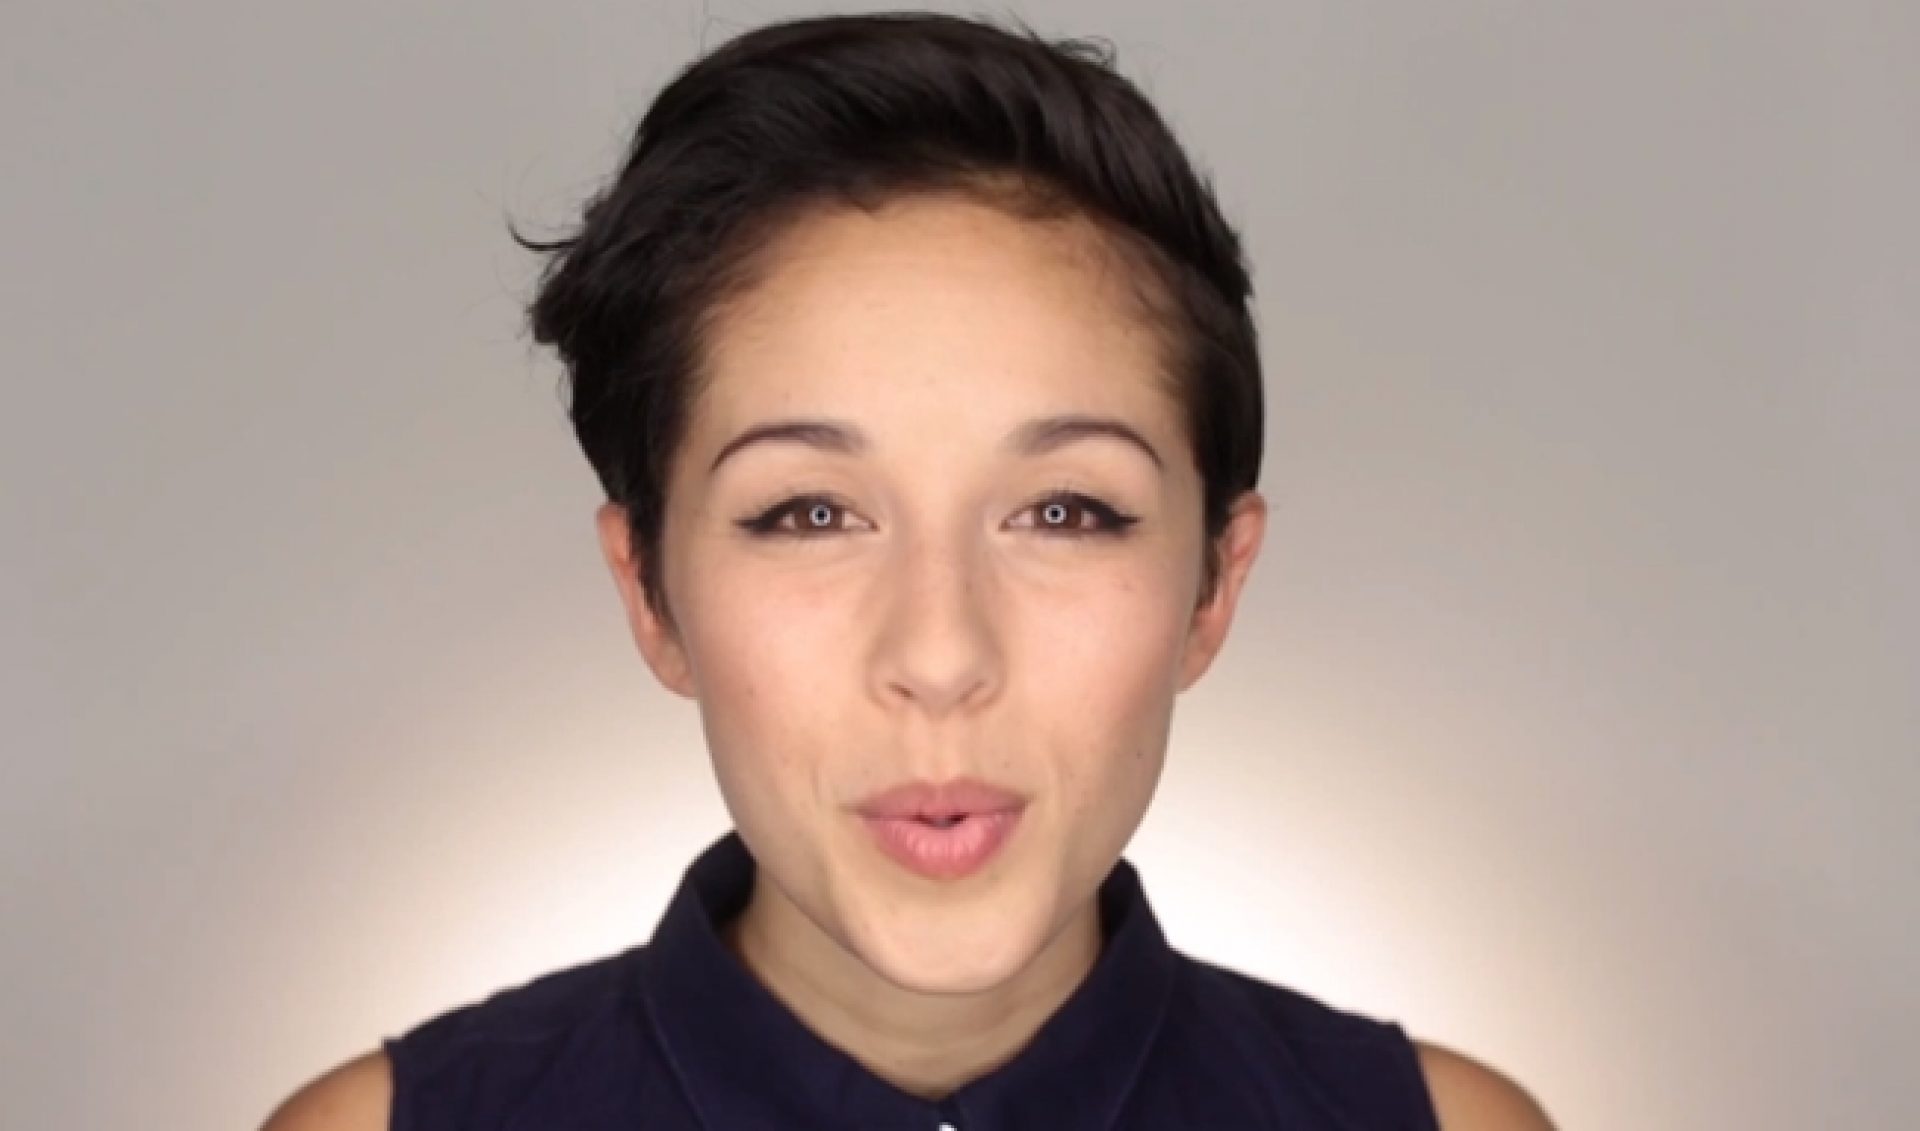 Kina Grannis Promotes New Album With Help From YouTube Community